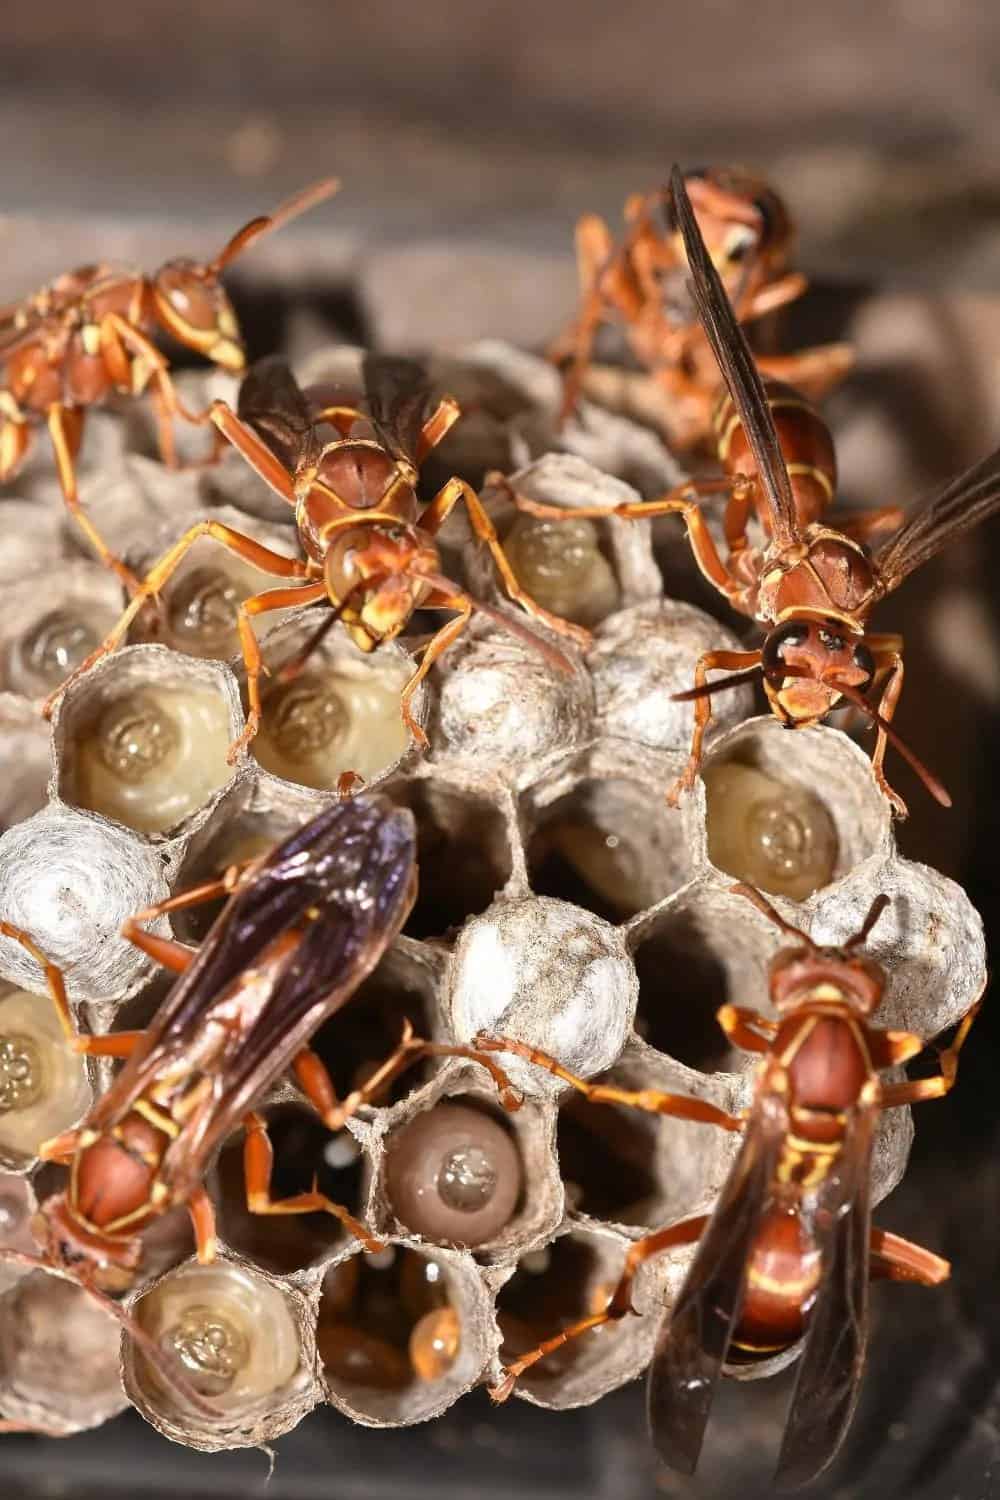 Paper wasps building a nest